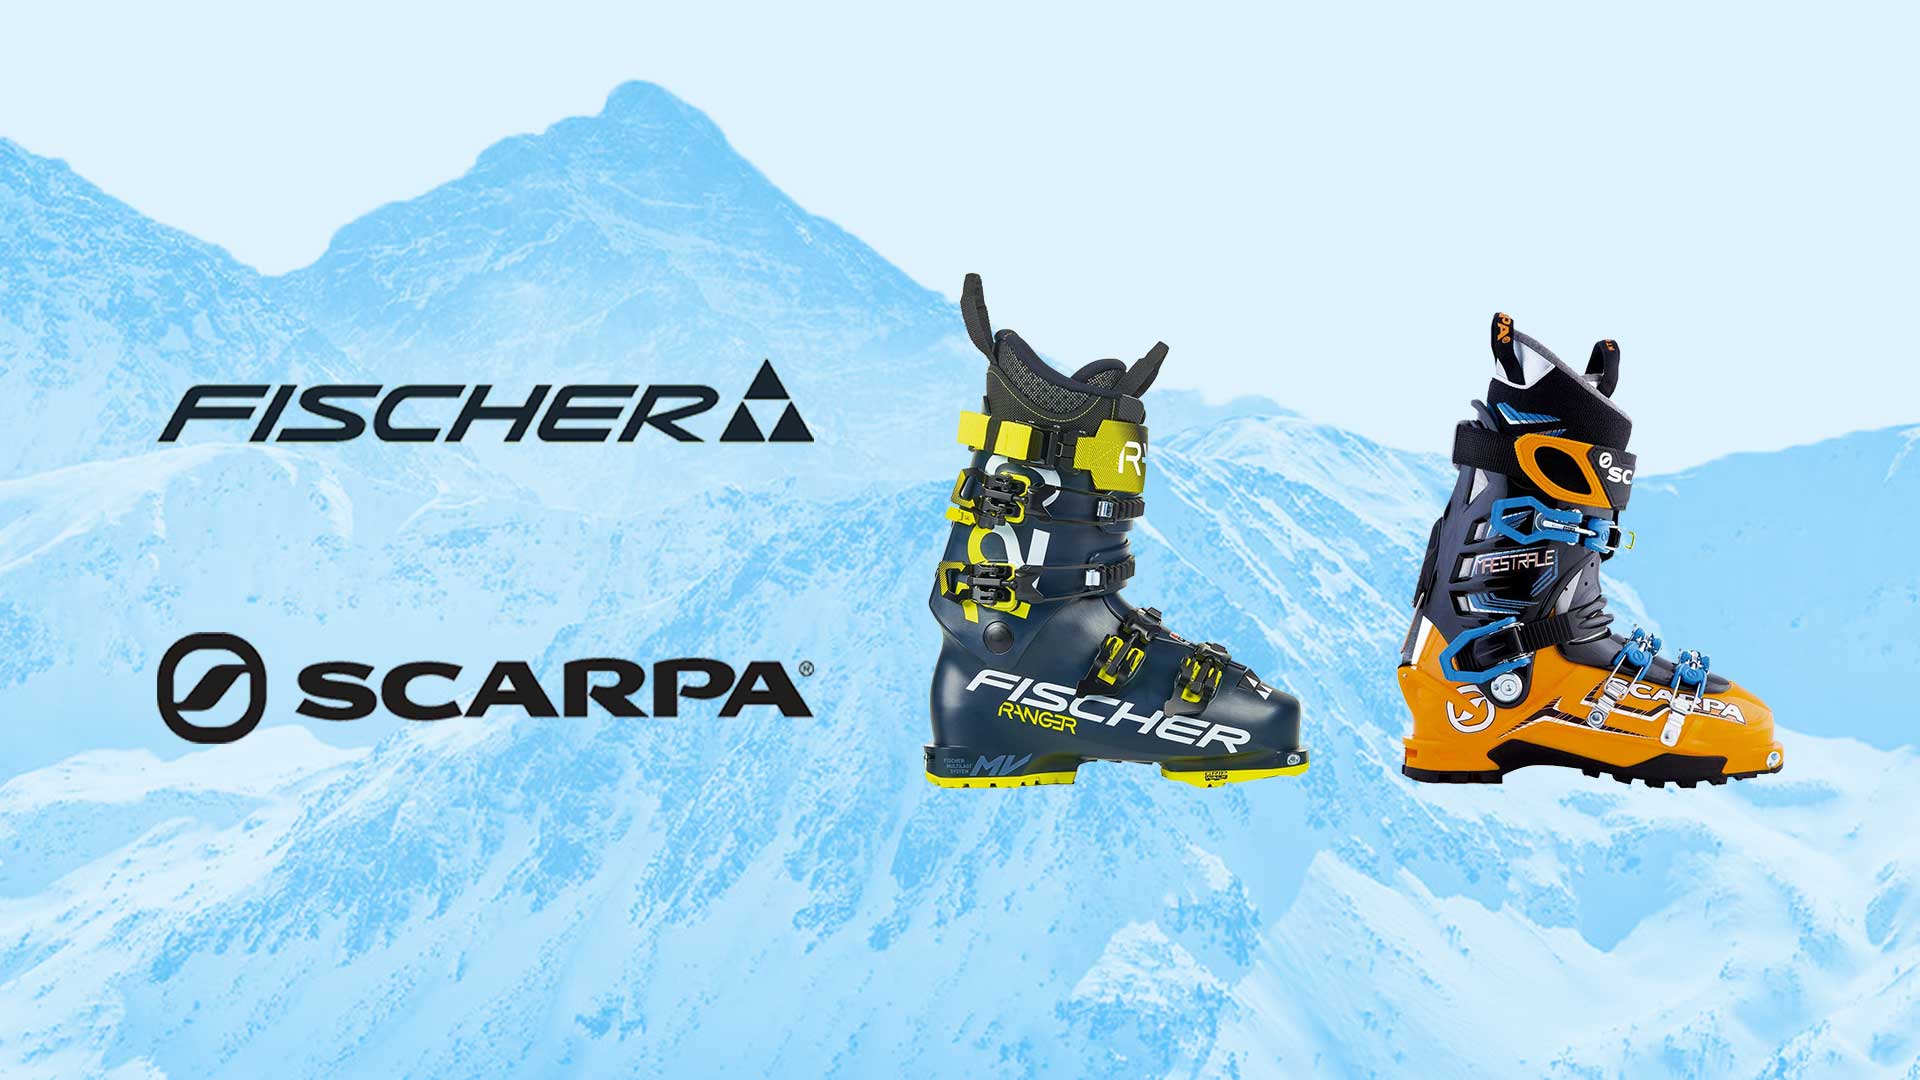 An illustration that shows brand logos—a dark blue and yellow green Fischer ski boot and a black and yellow Scarpa ski boot—against a snowy blue mountain in the background. Fischer logo, Scarpa logo.